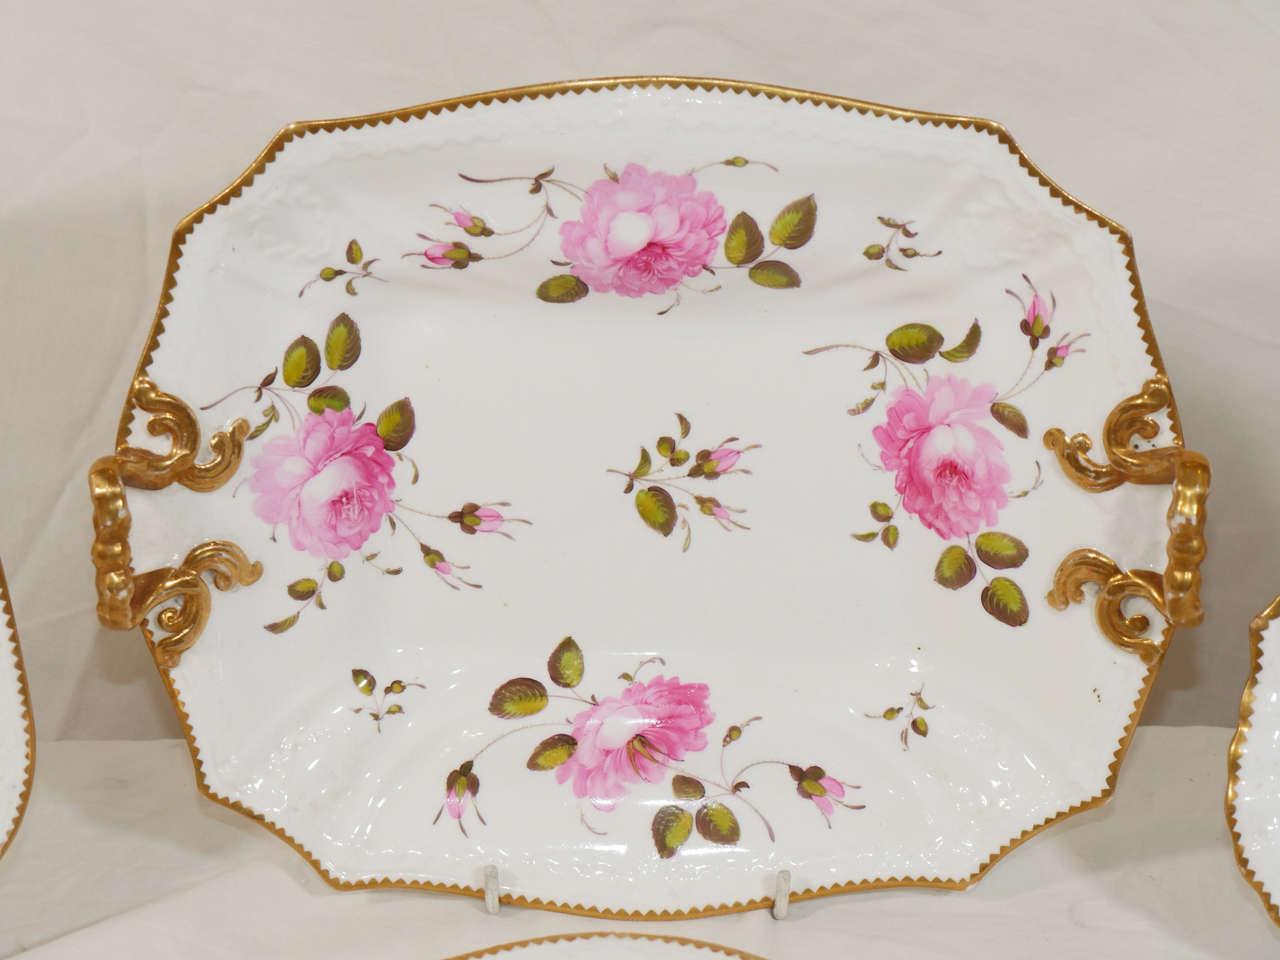 Victorian A Set of Sixteen Dishes: A Dessert Service Decorated with Pink Roses